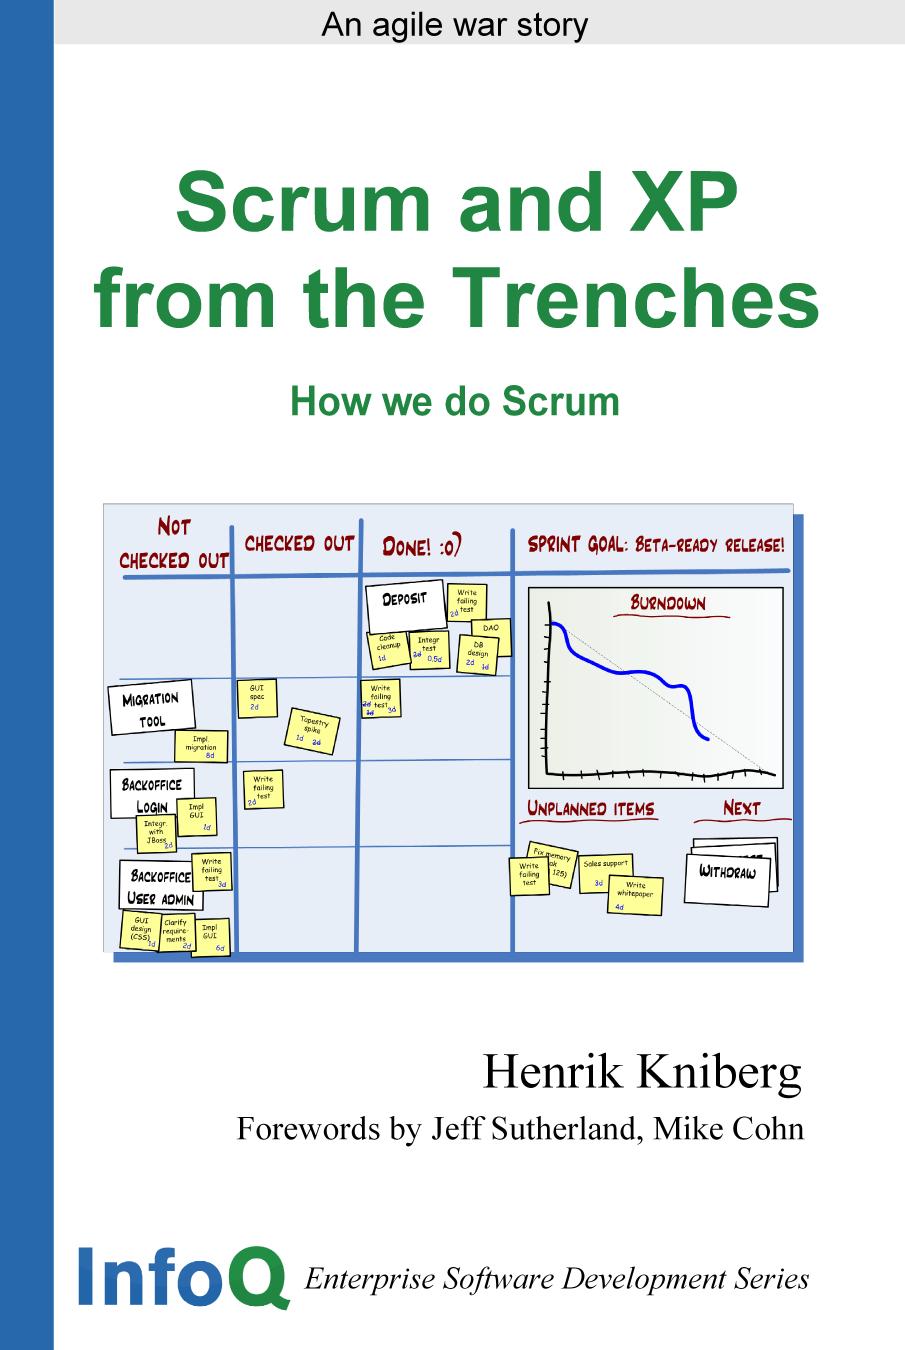 Scrum and XP from theTrenches. How we do Scrum